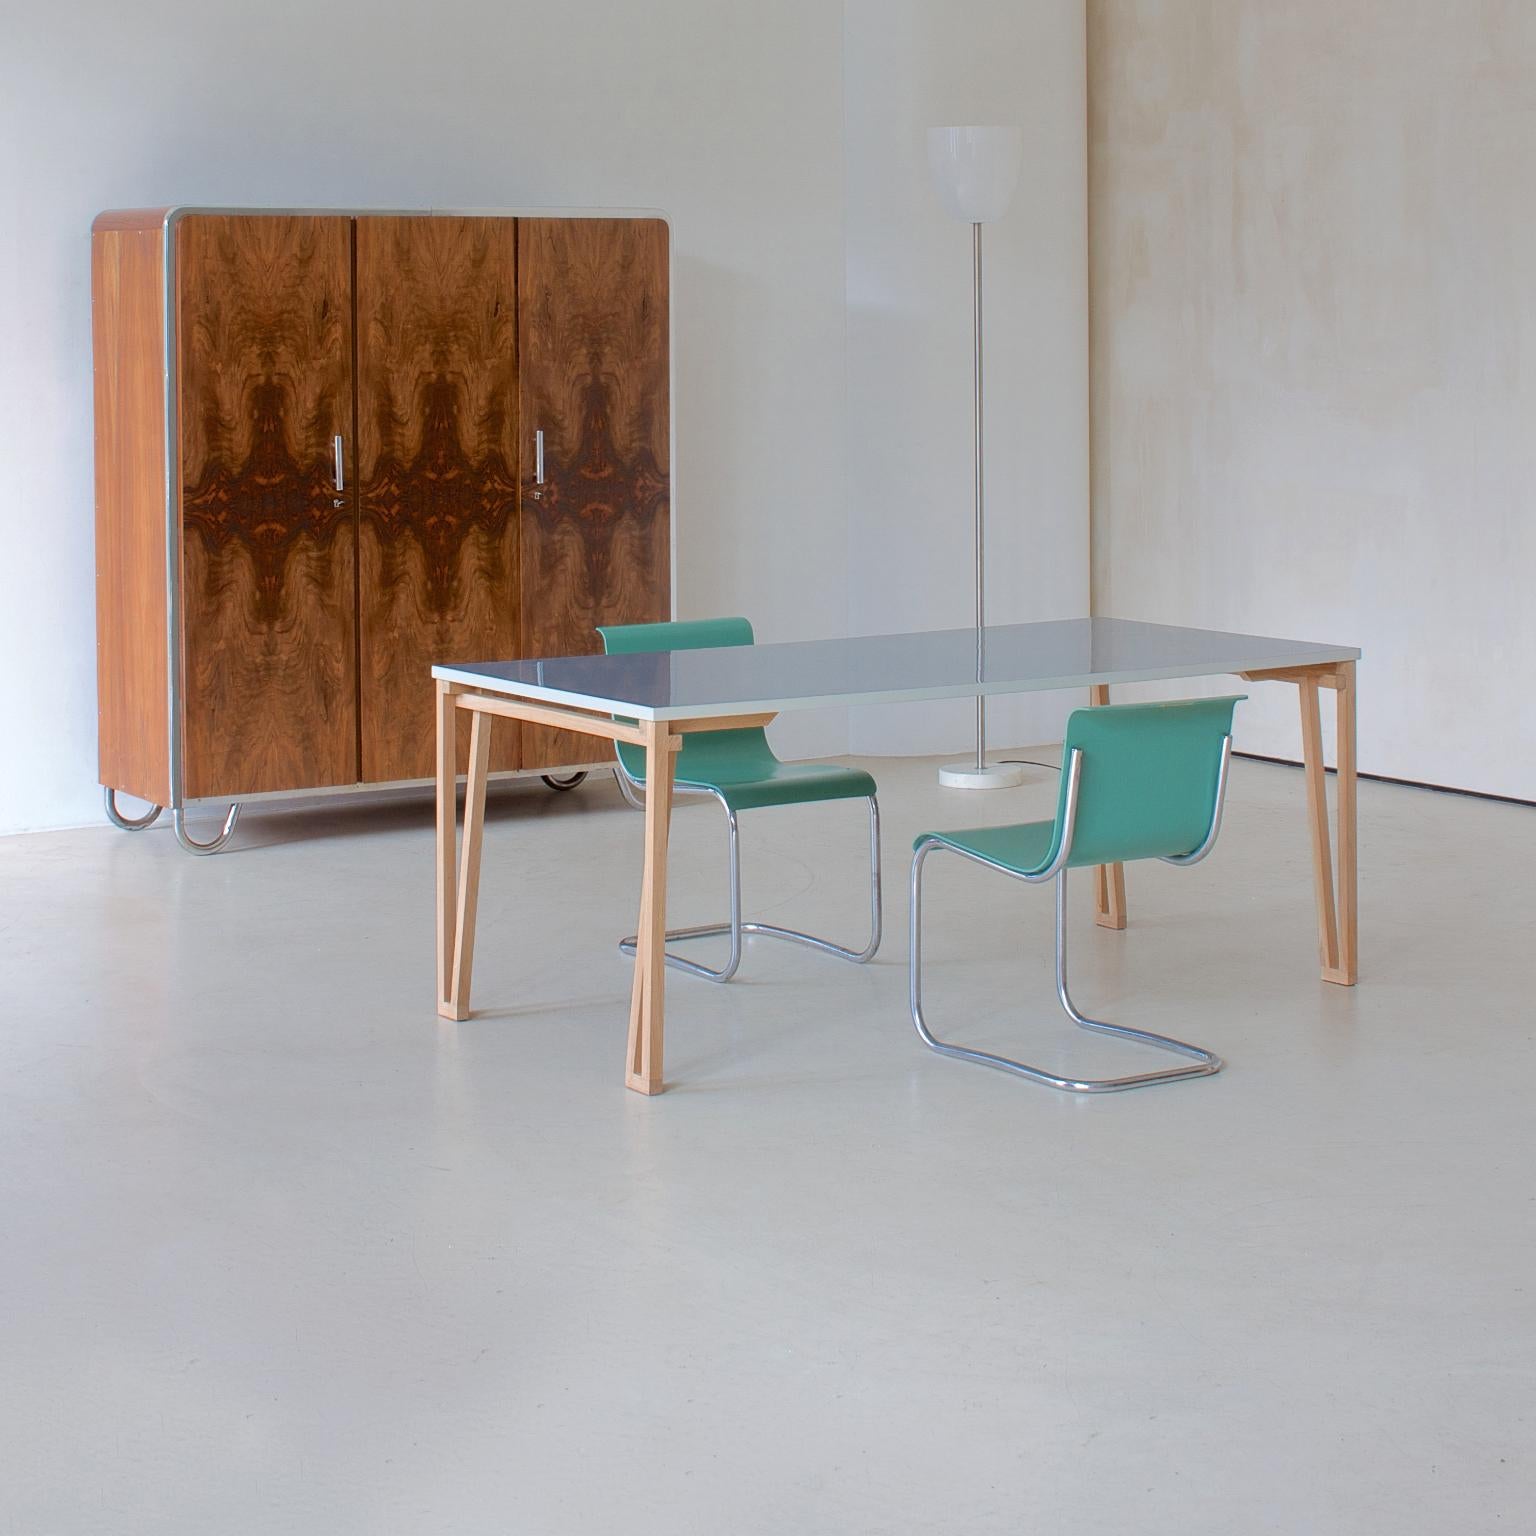 Modern Contemporary Handcrafted Wooden Table, Customisable, by GMD Berlin, 2014 For Sale 1